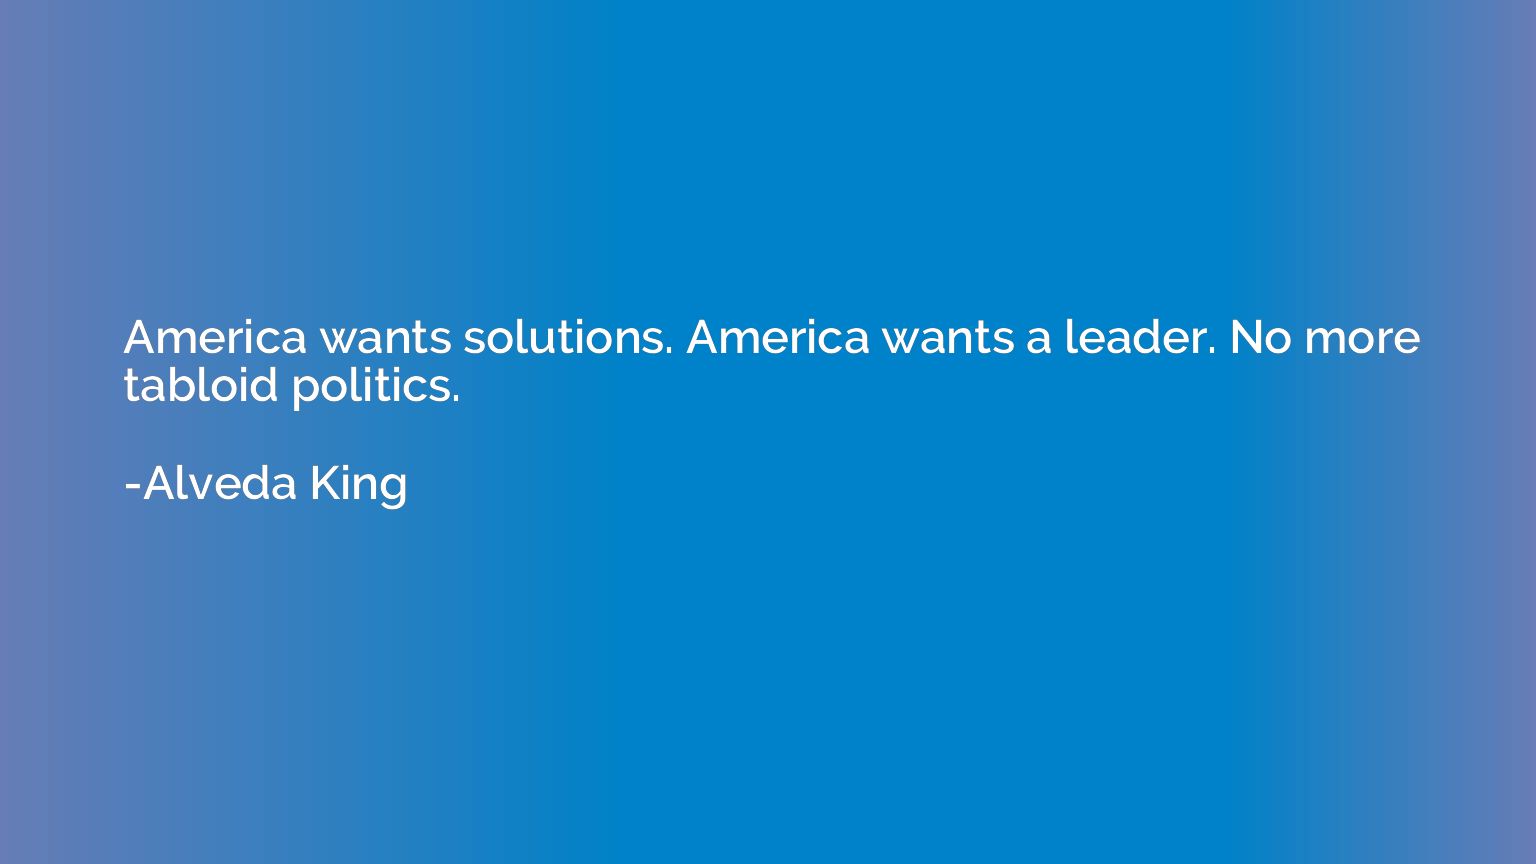 America wants solutions. America wants a leader. No more tab